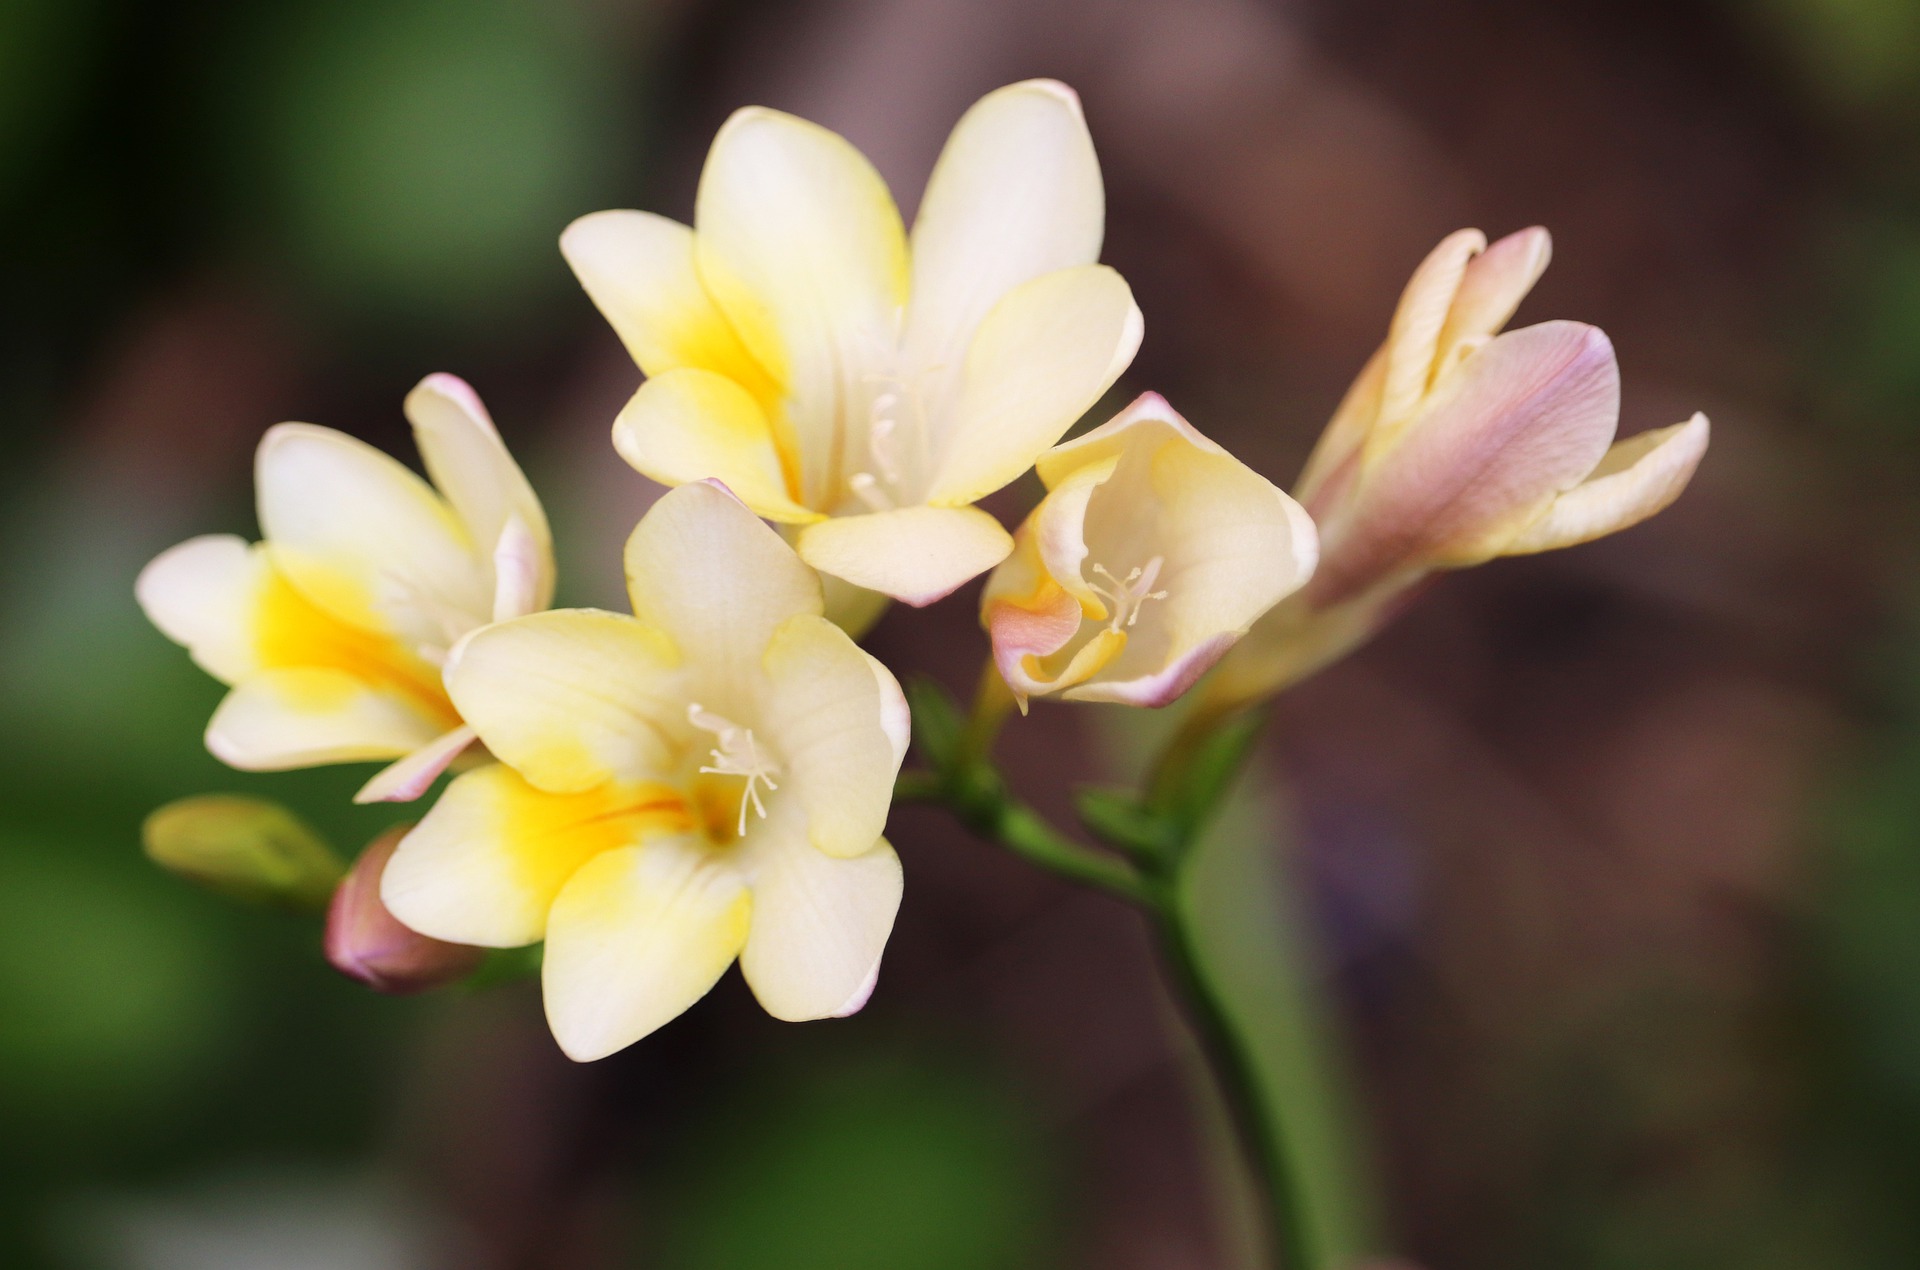 freesia flower meaning, spiritual symbolism, color meaning & more -